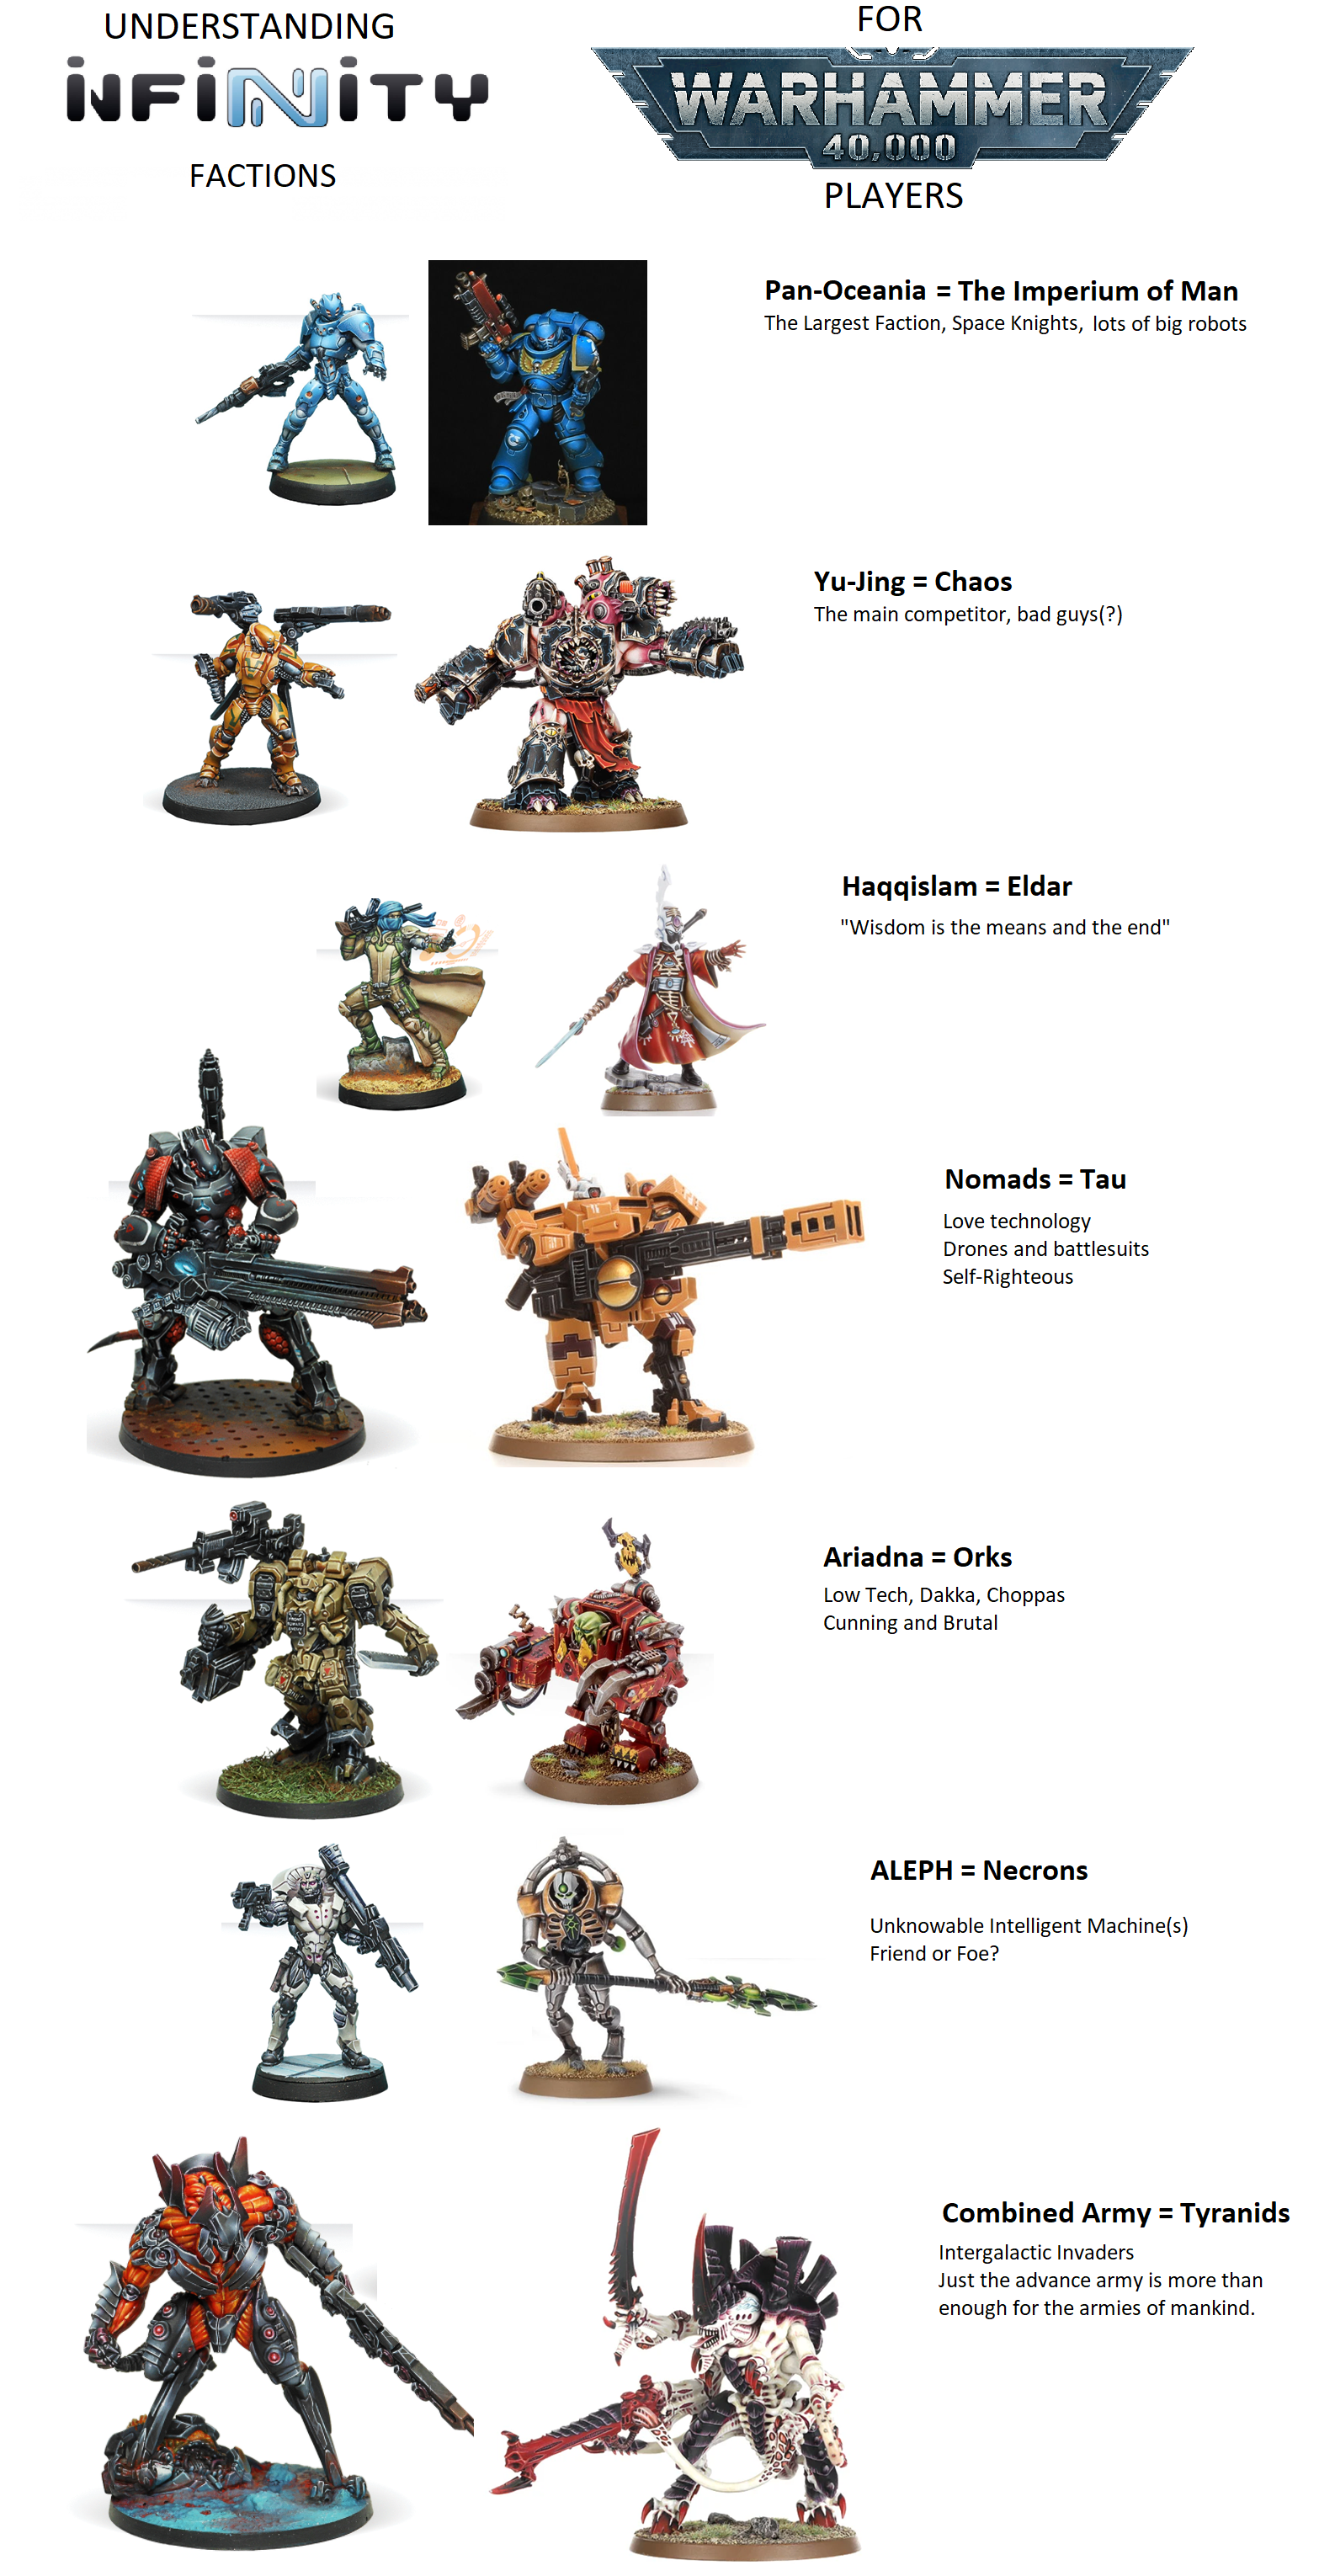 Which faction has the best synergy between units in Warhammer 40K?